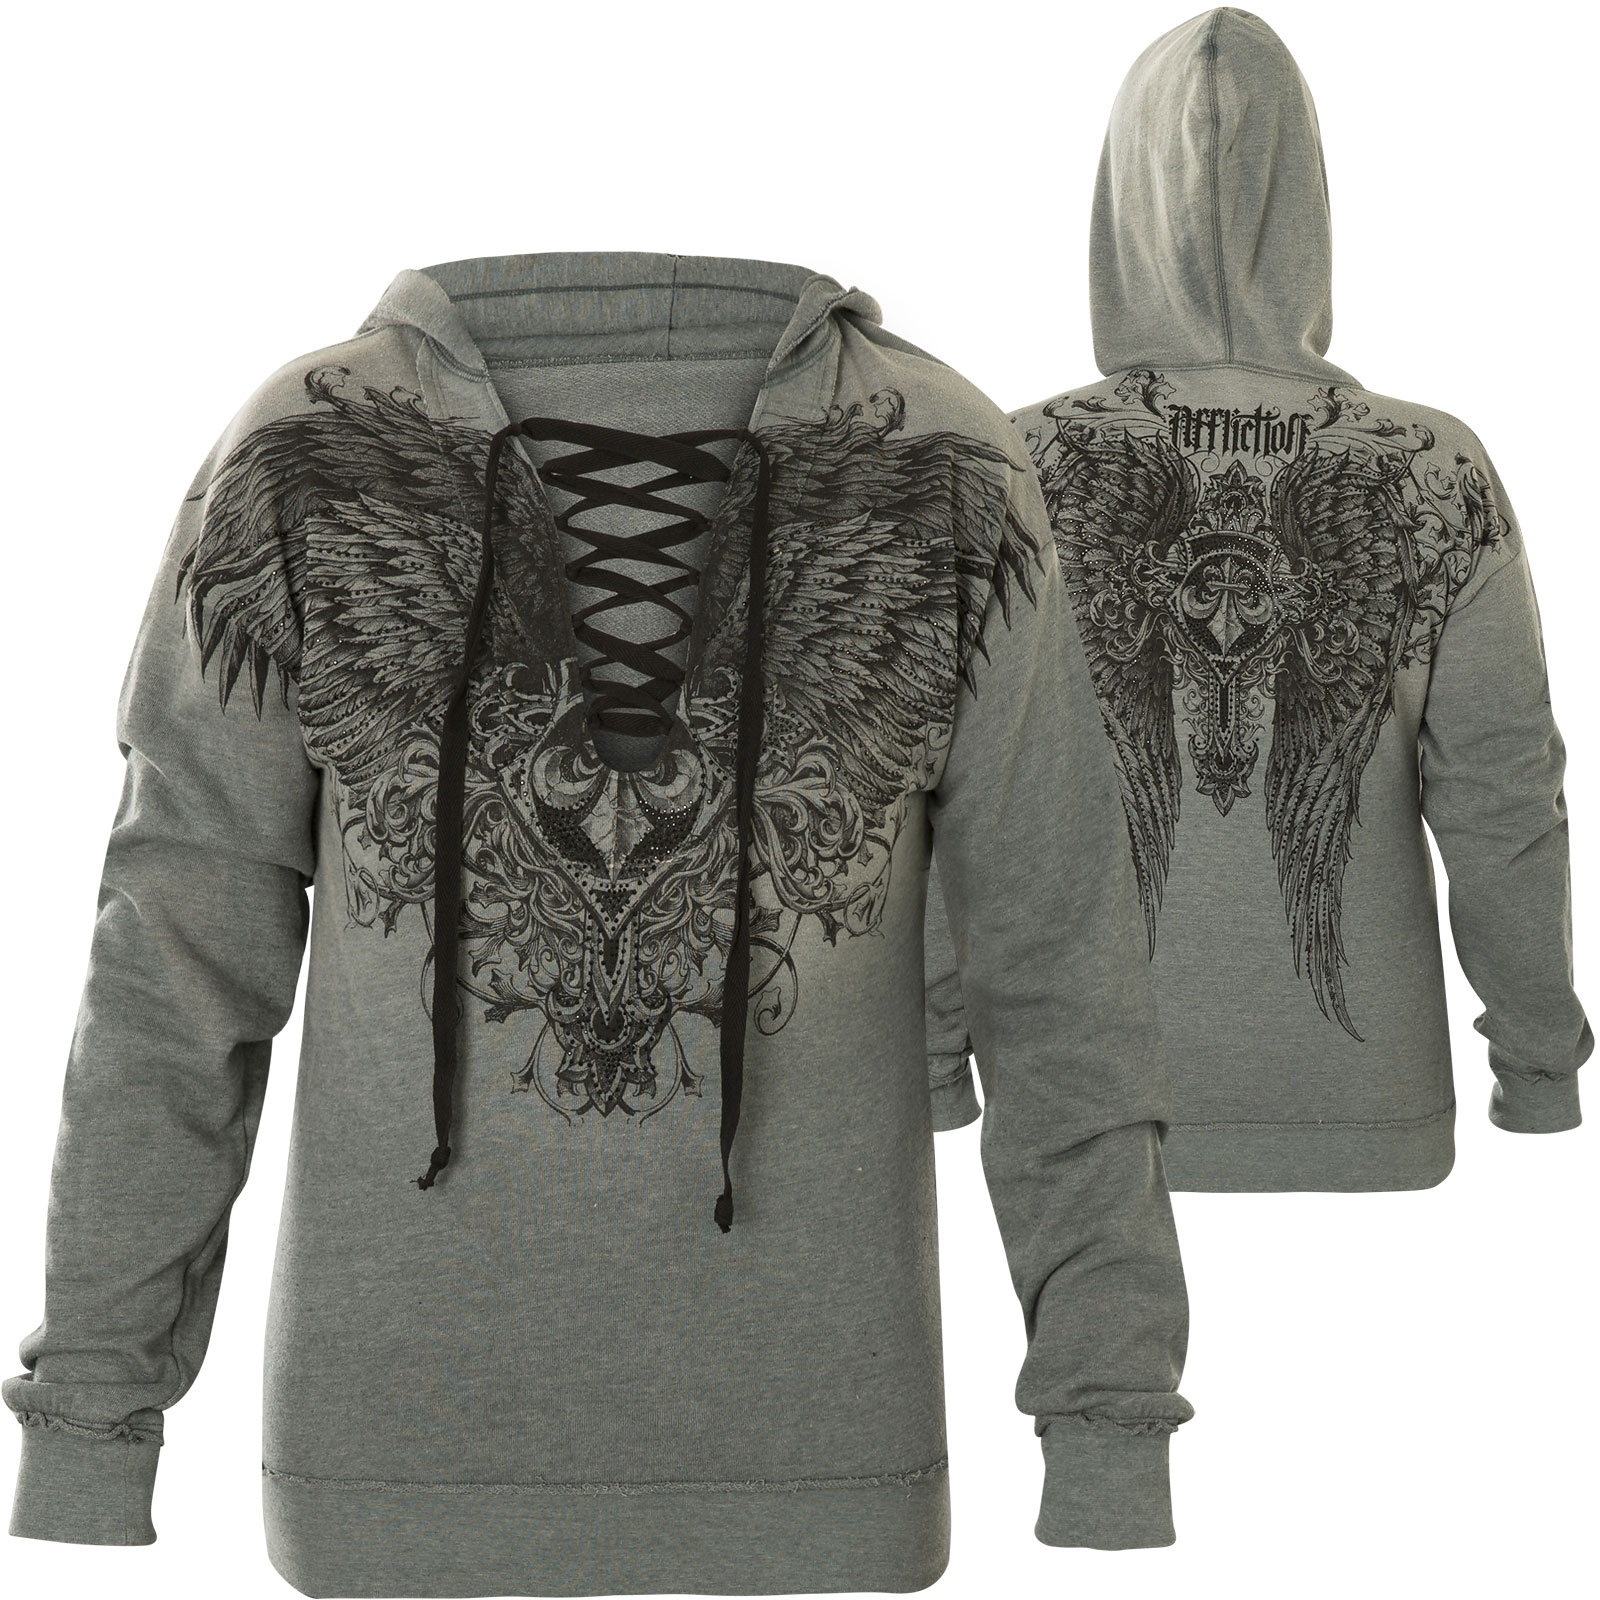 Affliction Hoody Aviana Print With A Cross And Wings